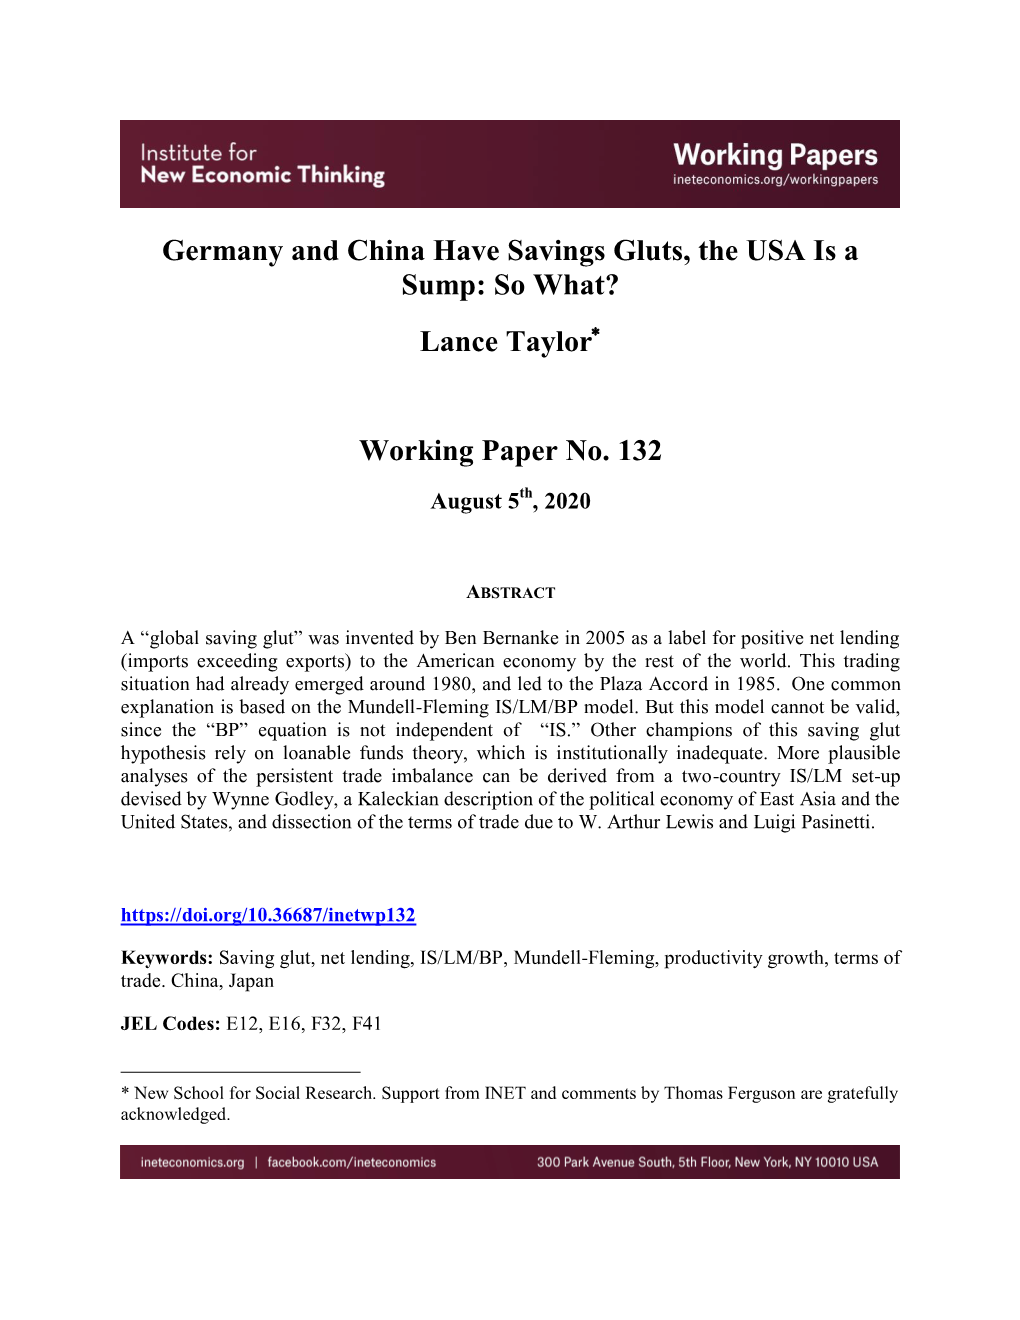 Germany and China Have Savings Gluts, the USA Is a Sump: So What? Lance Taylor